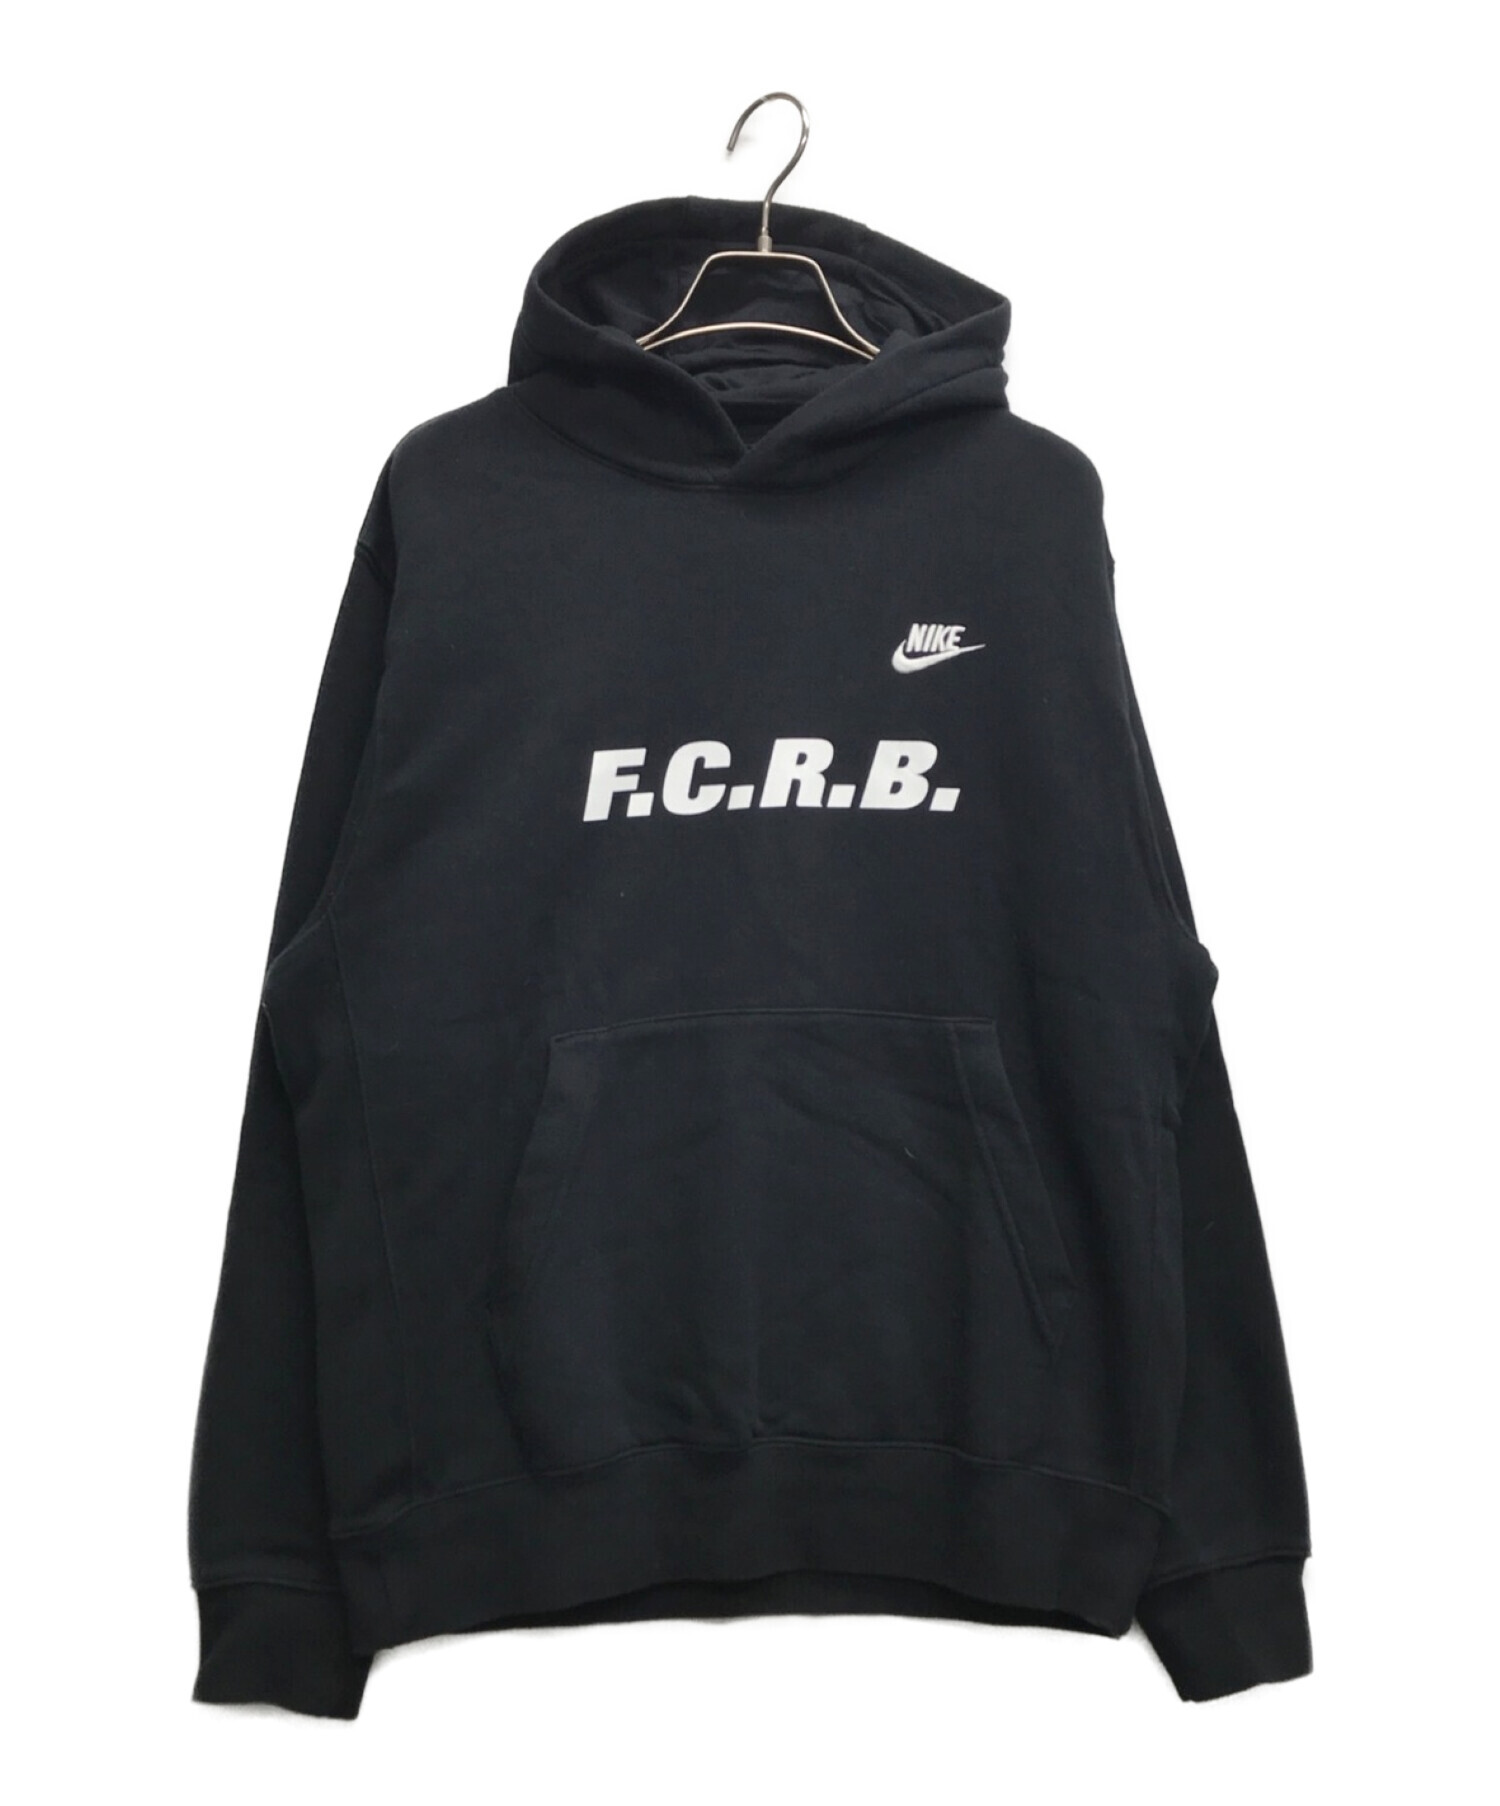 fcrb Nike